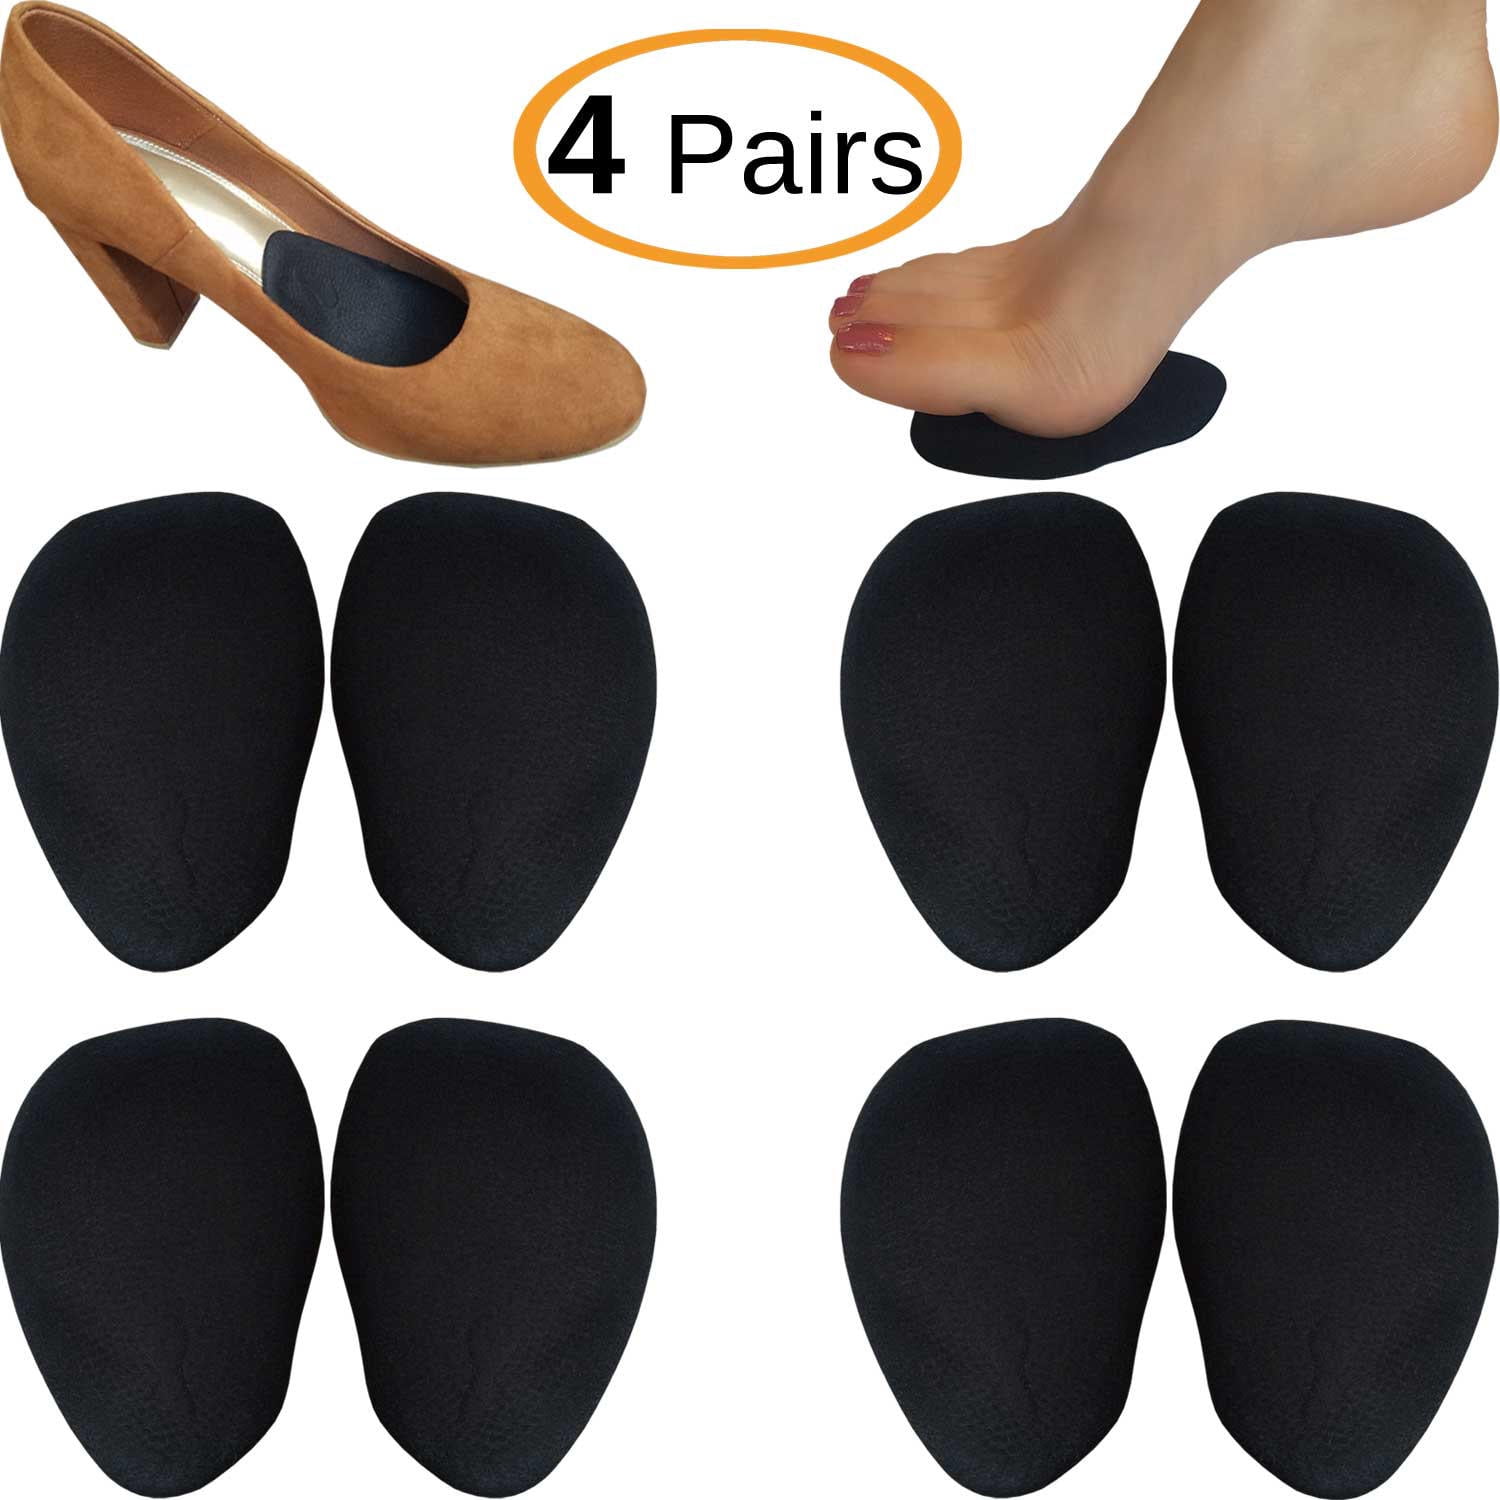 4 Pairs Chiroplax High Heel Cushions Inserts Pads Liner Grip Anti Slip Insoles 